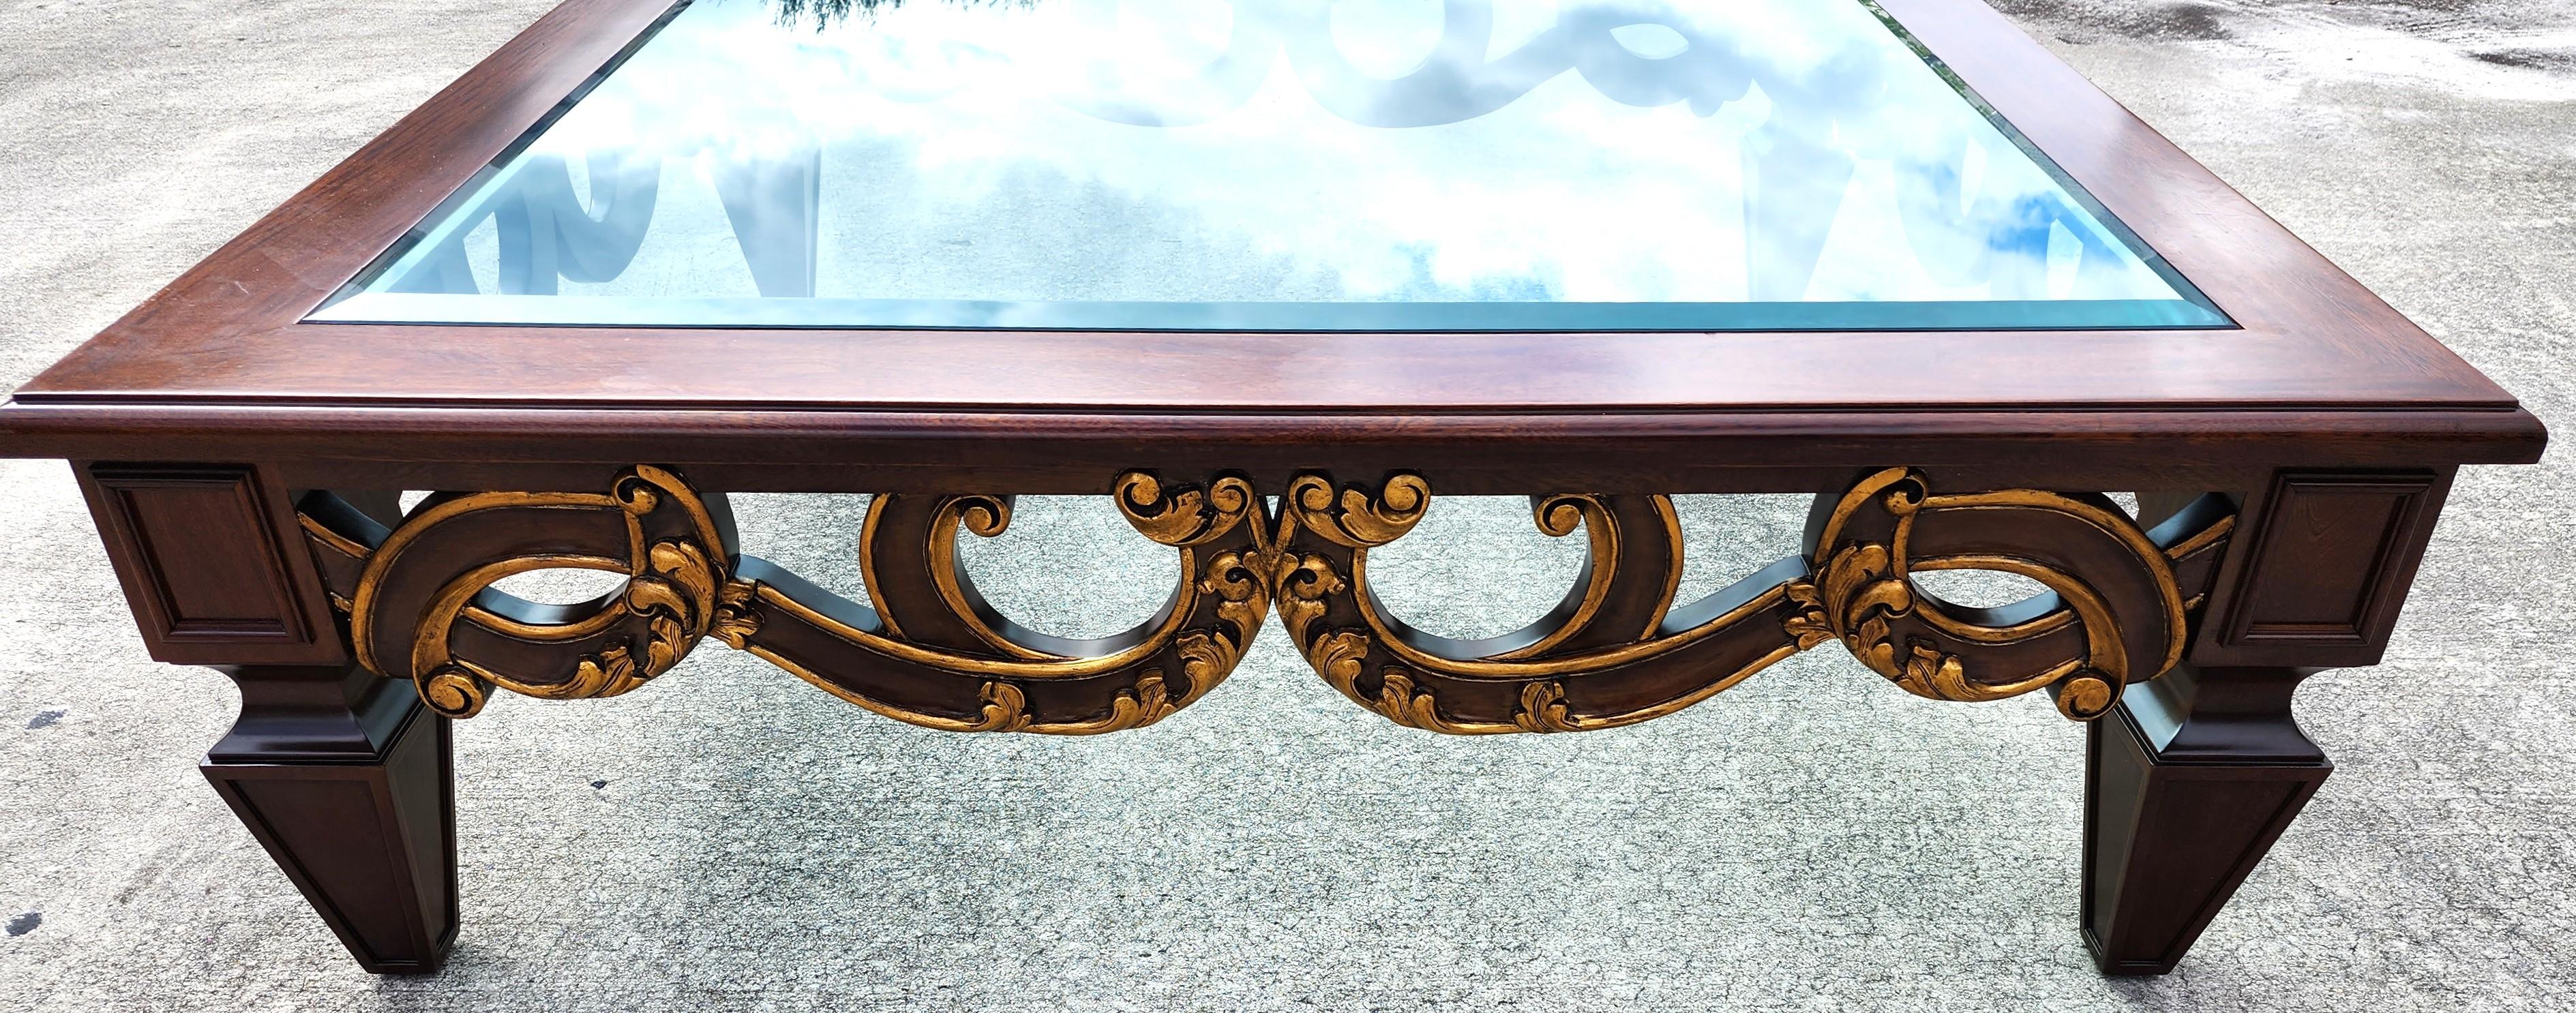 Vintage French Provincial Coffee Table Huge 5 Foot For Sale 5